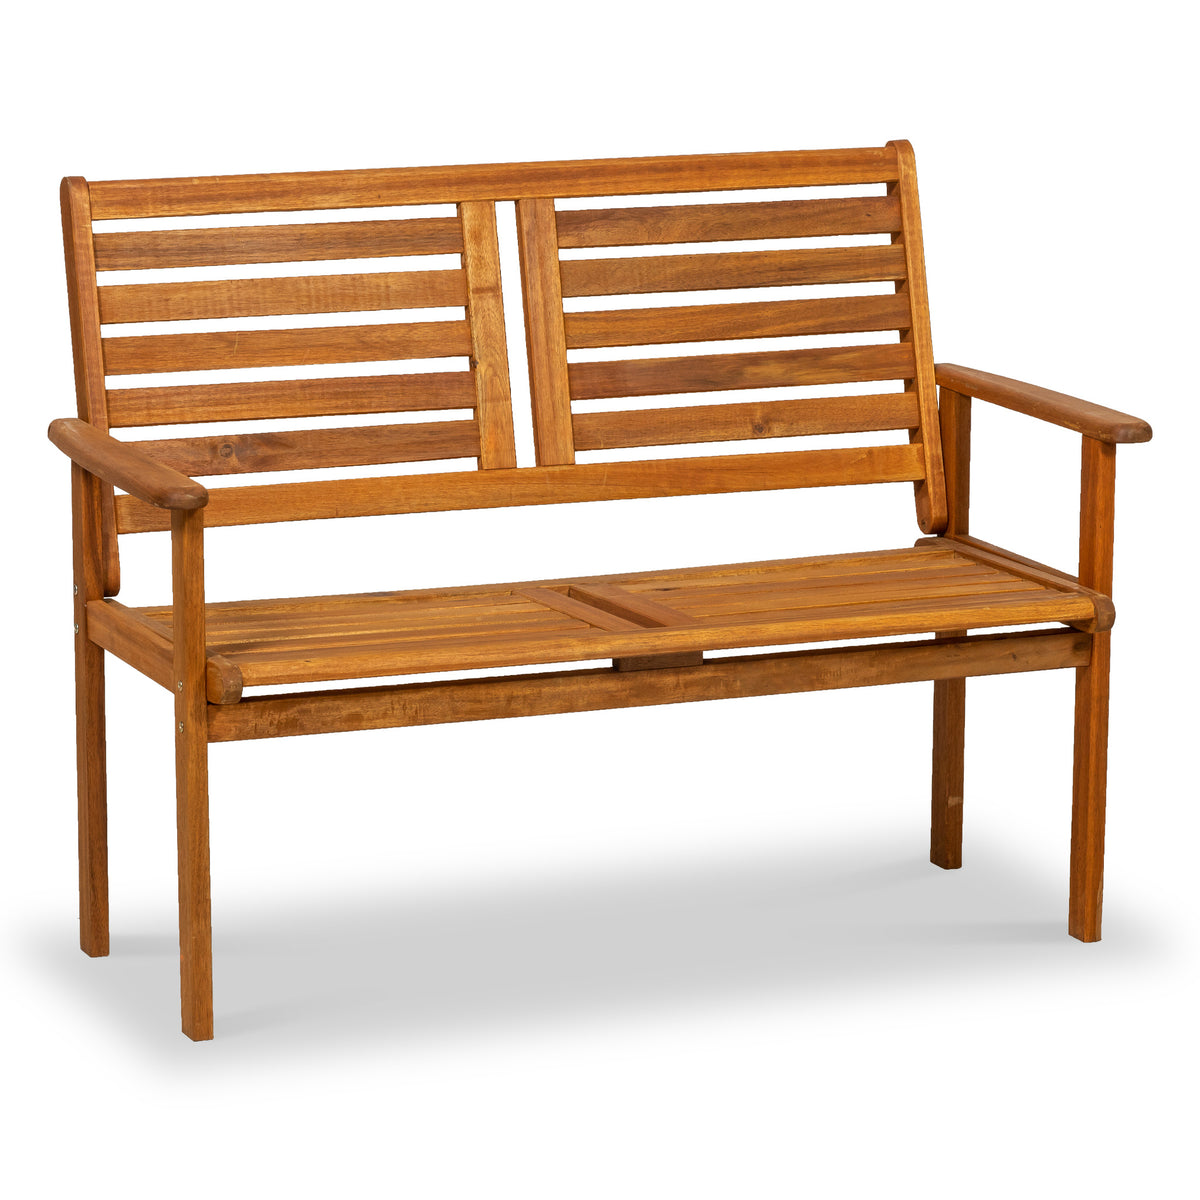 Napoli Acacia 2 Seater Bench from Roseland